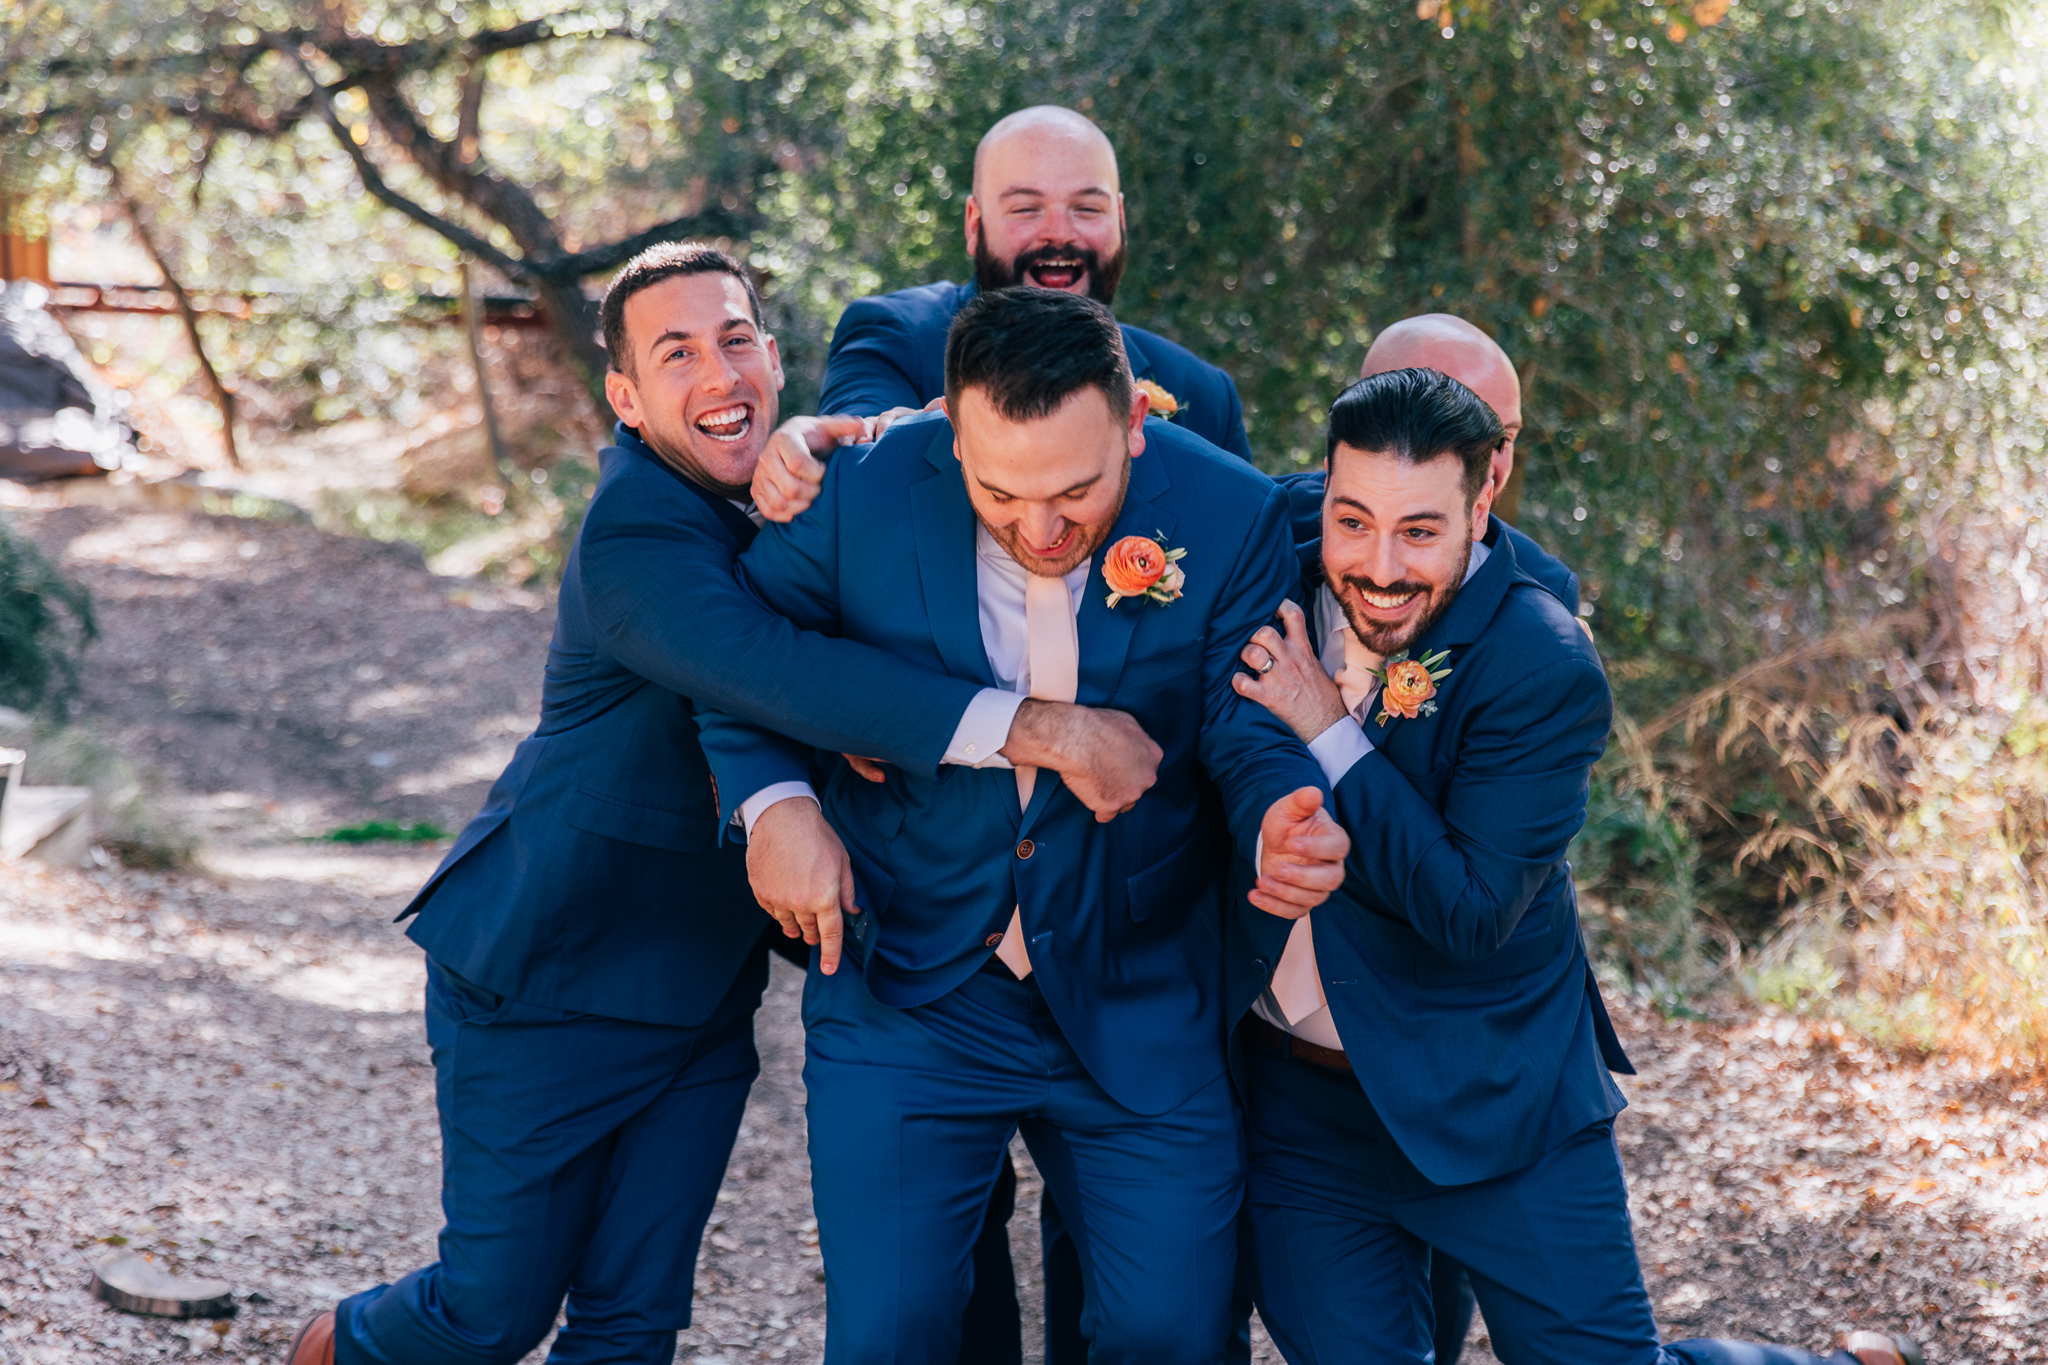 groom stands with groomsmen in blue suits with light pink ties and brown shoes